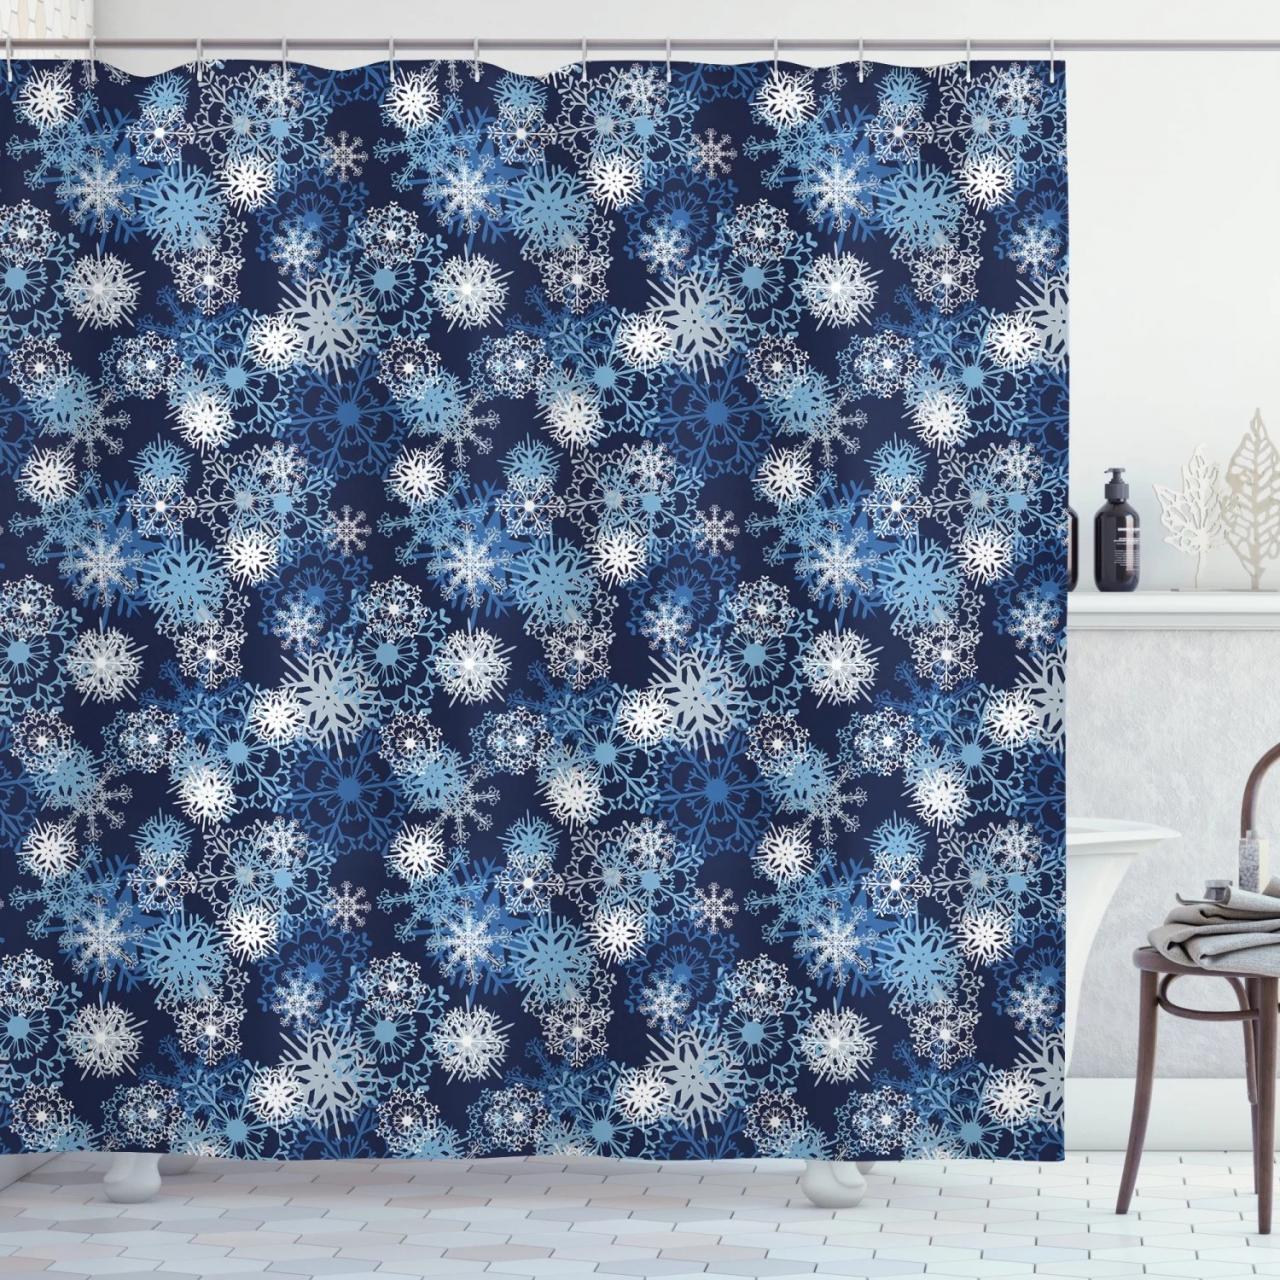 Winter Shower Curtain, Various Different Ornate Snowflakes Blizzard